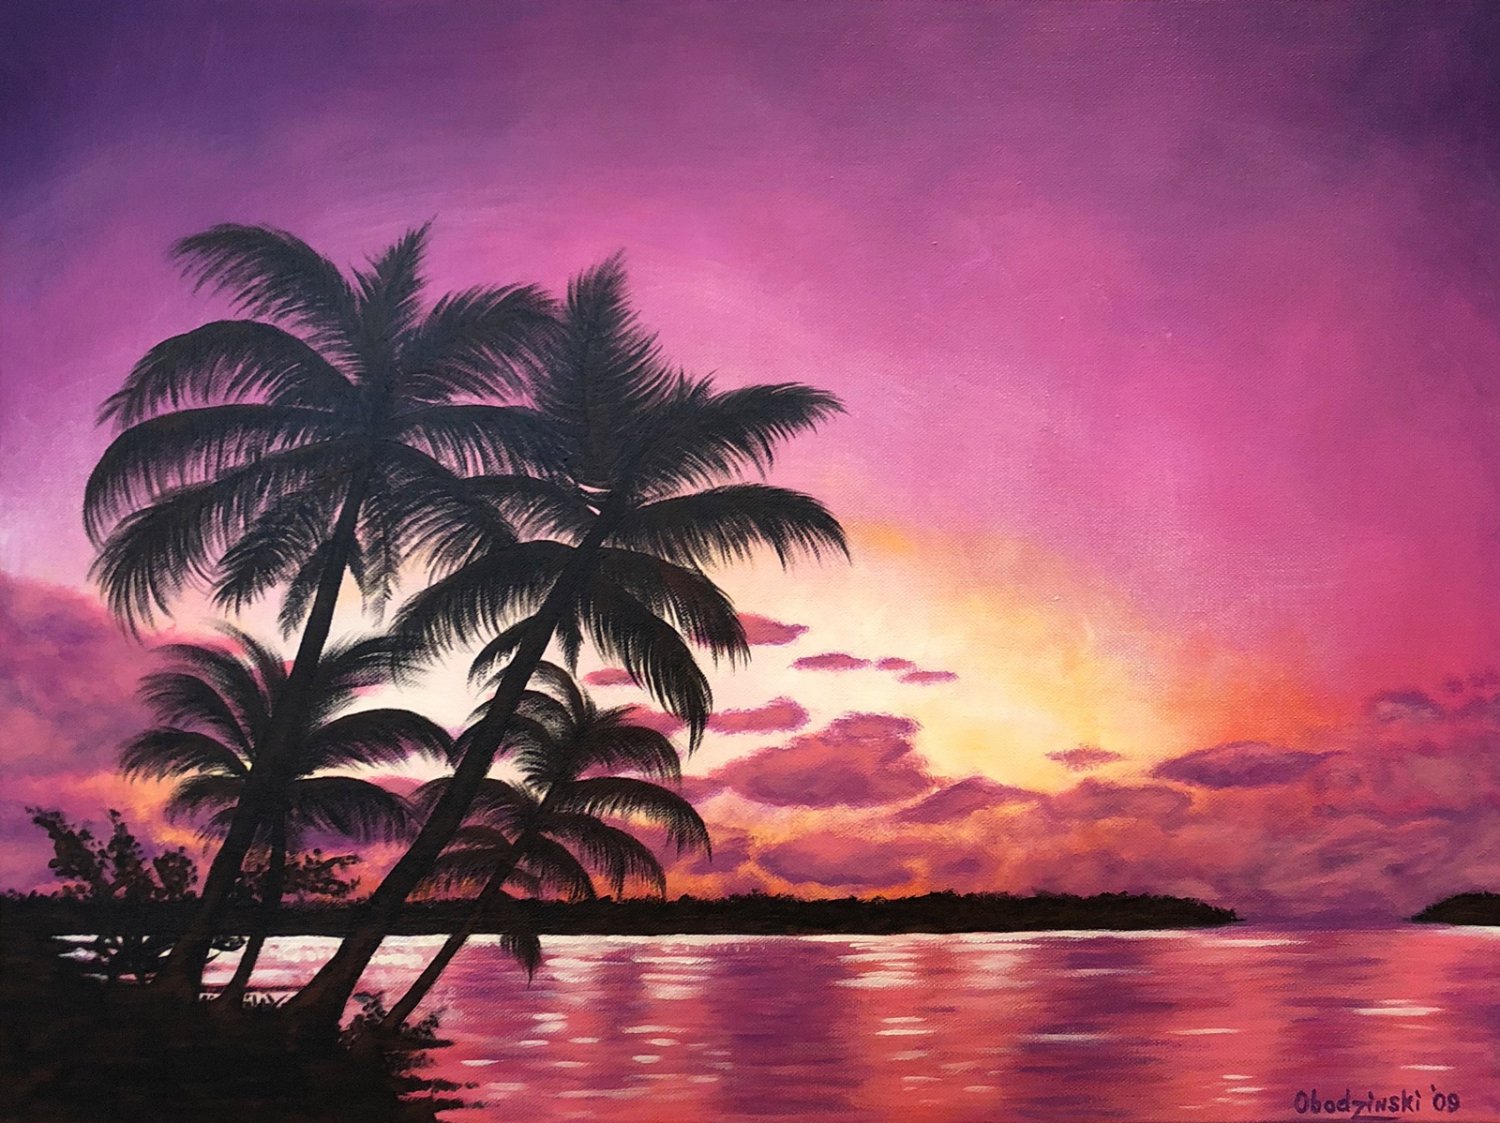 "Serenity" Tropical Island Sunset Scenic Art by Gregg's Deep Colors